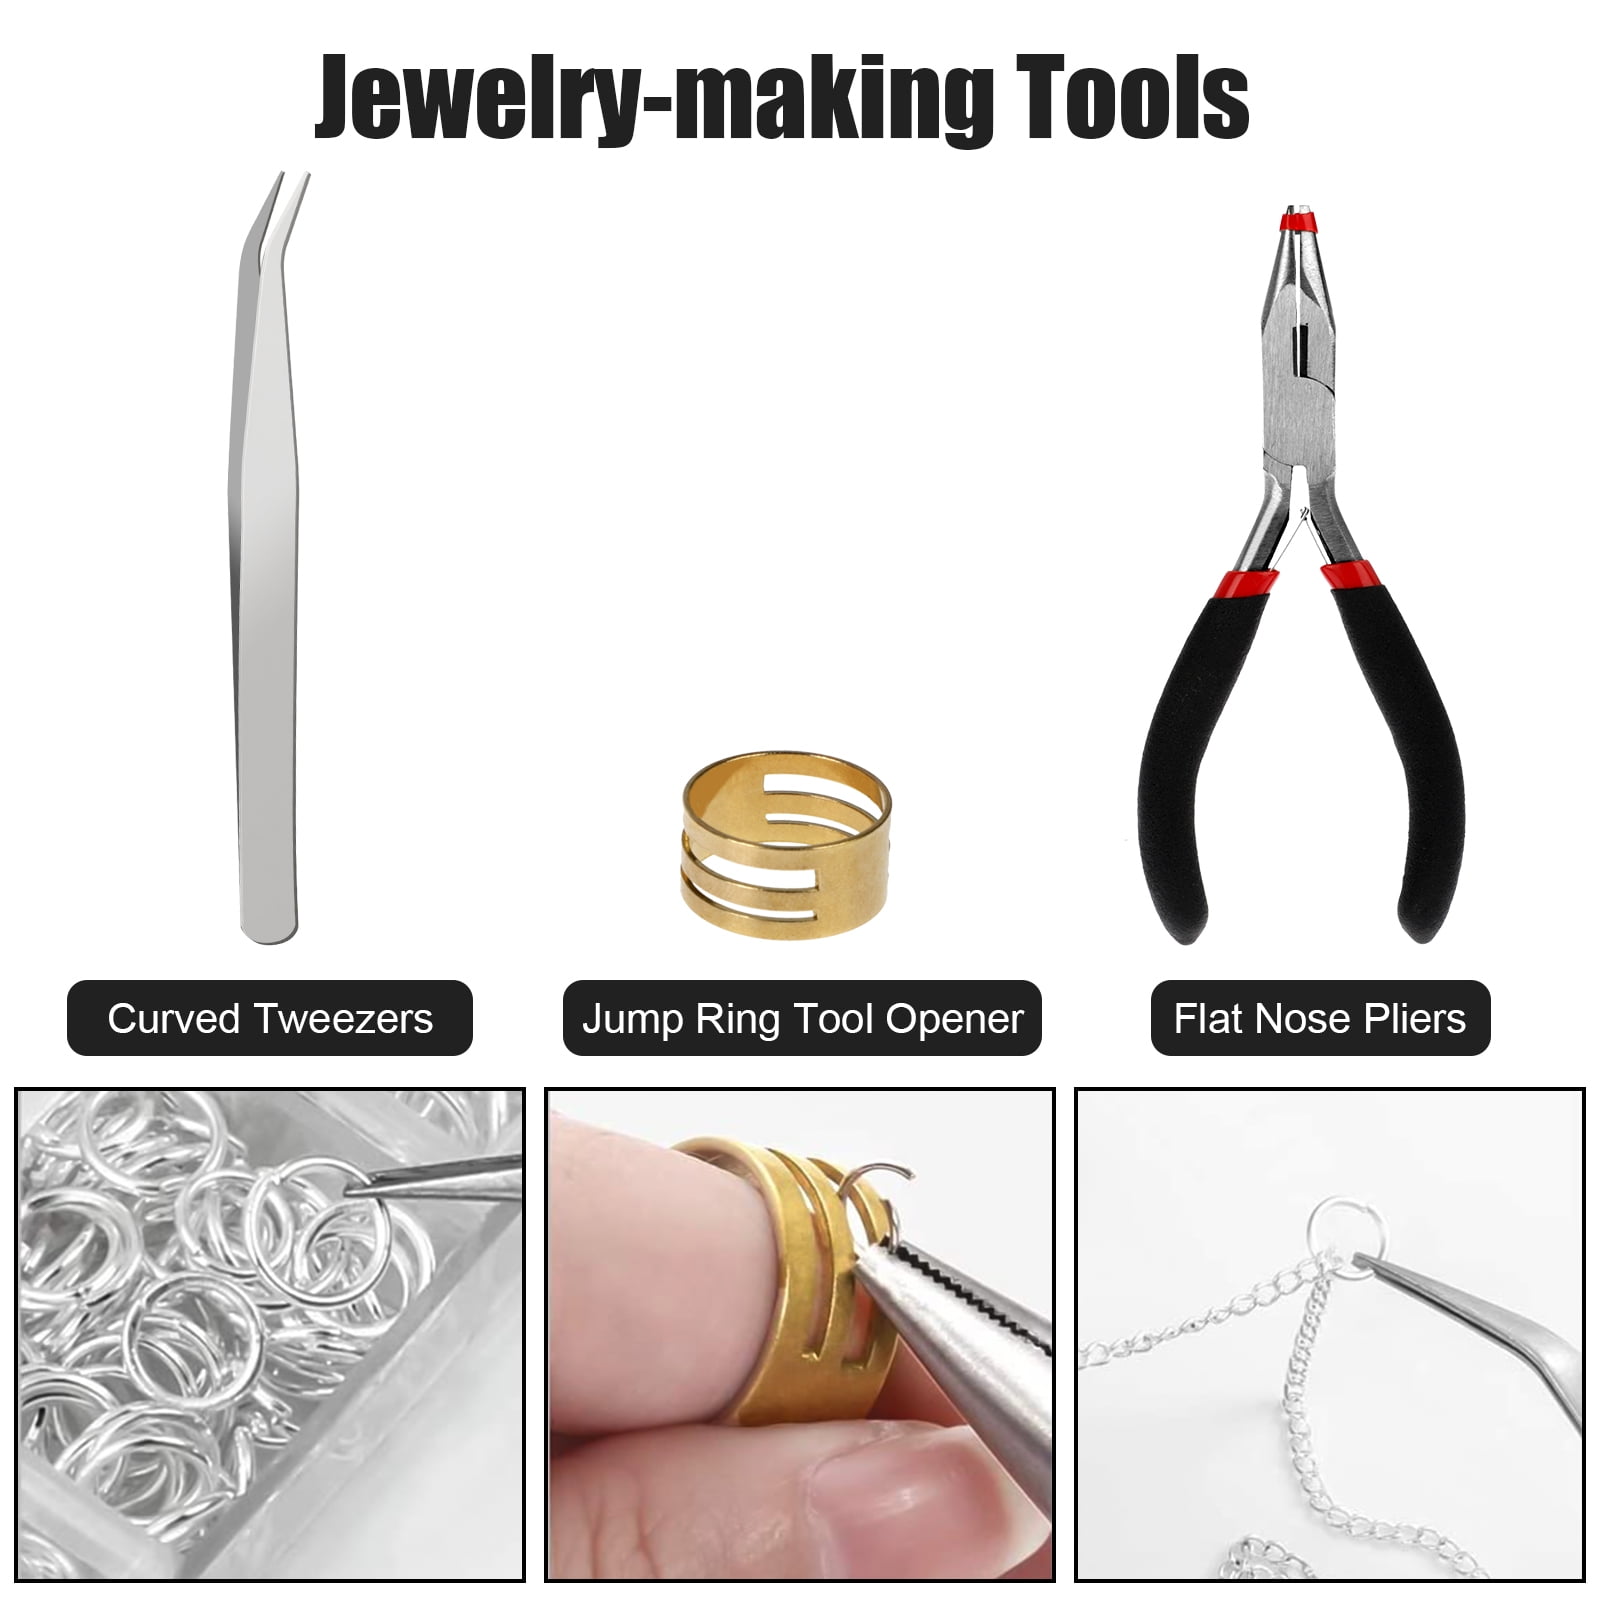 974pcs Jewelry Making Supplies, EEEkit Jewelry Repair Kit, Open Jump Rings  and Lobster Clasps Jewelry Findings Kit with Jewelry Tools Pliers, Jewelry  Wire, Beading Supplies, Wire Wrapping Tool Kits 